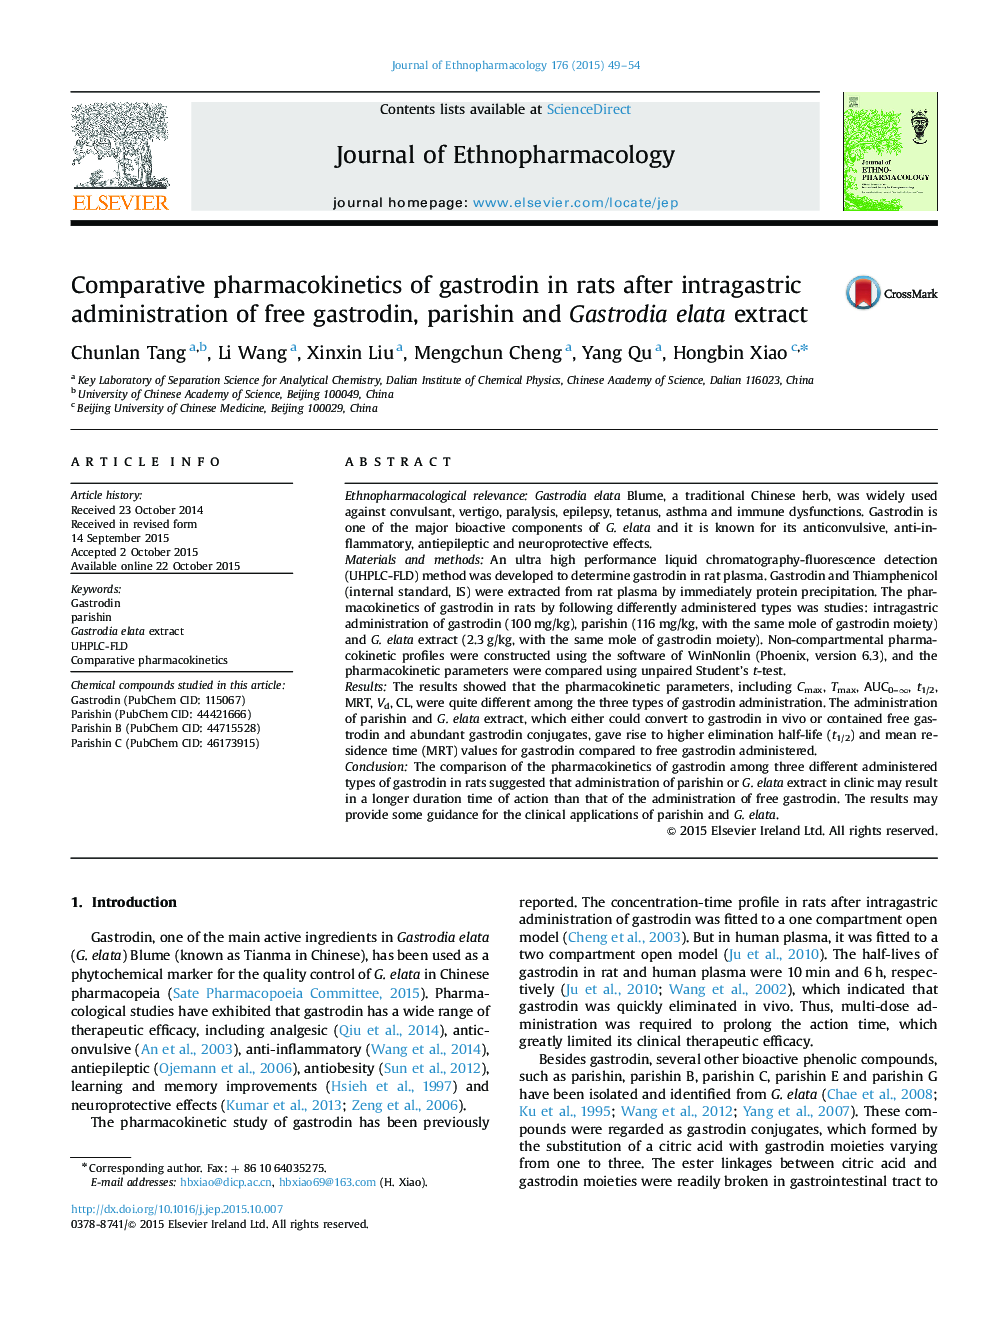 Comparative pharmacokinetics of gastrodin in rats after intragastric administration of free gastrodin, parishin and Gastrodia elata extract